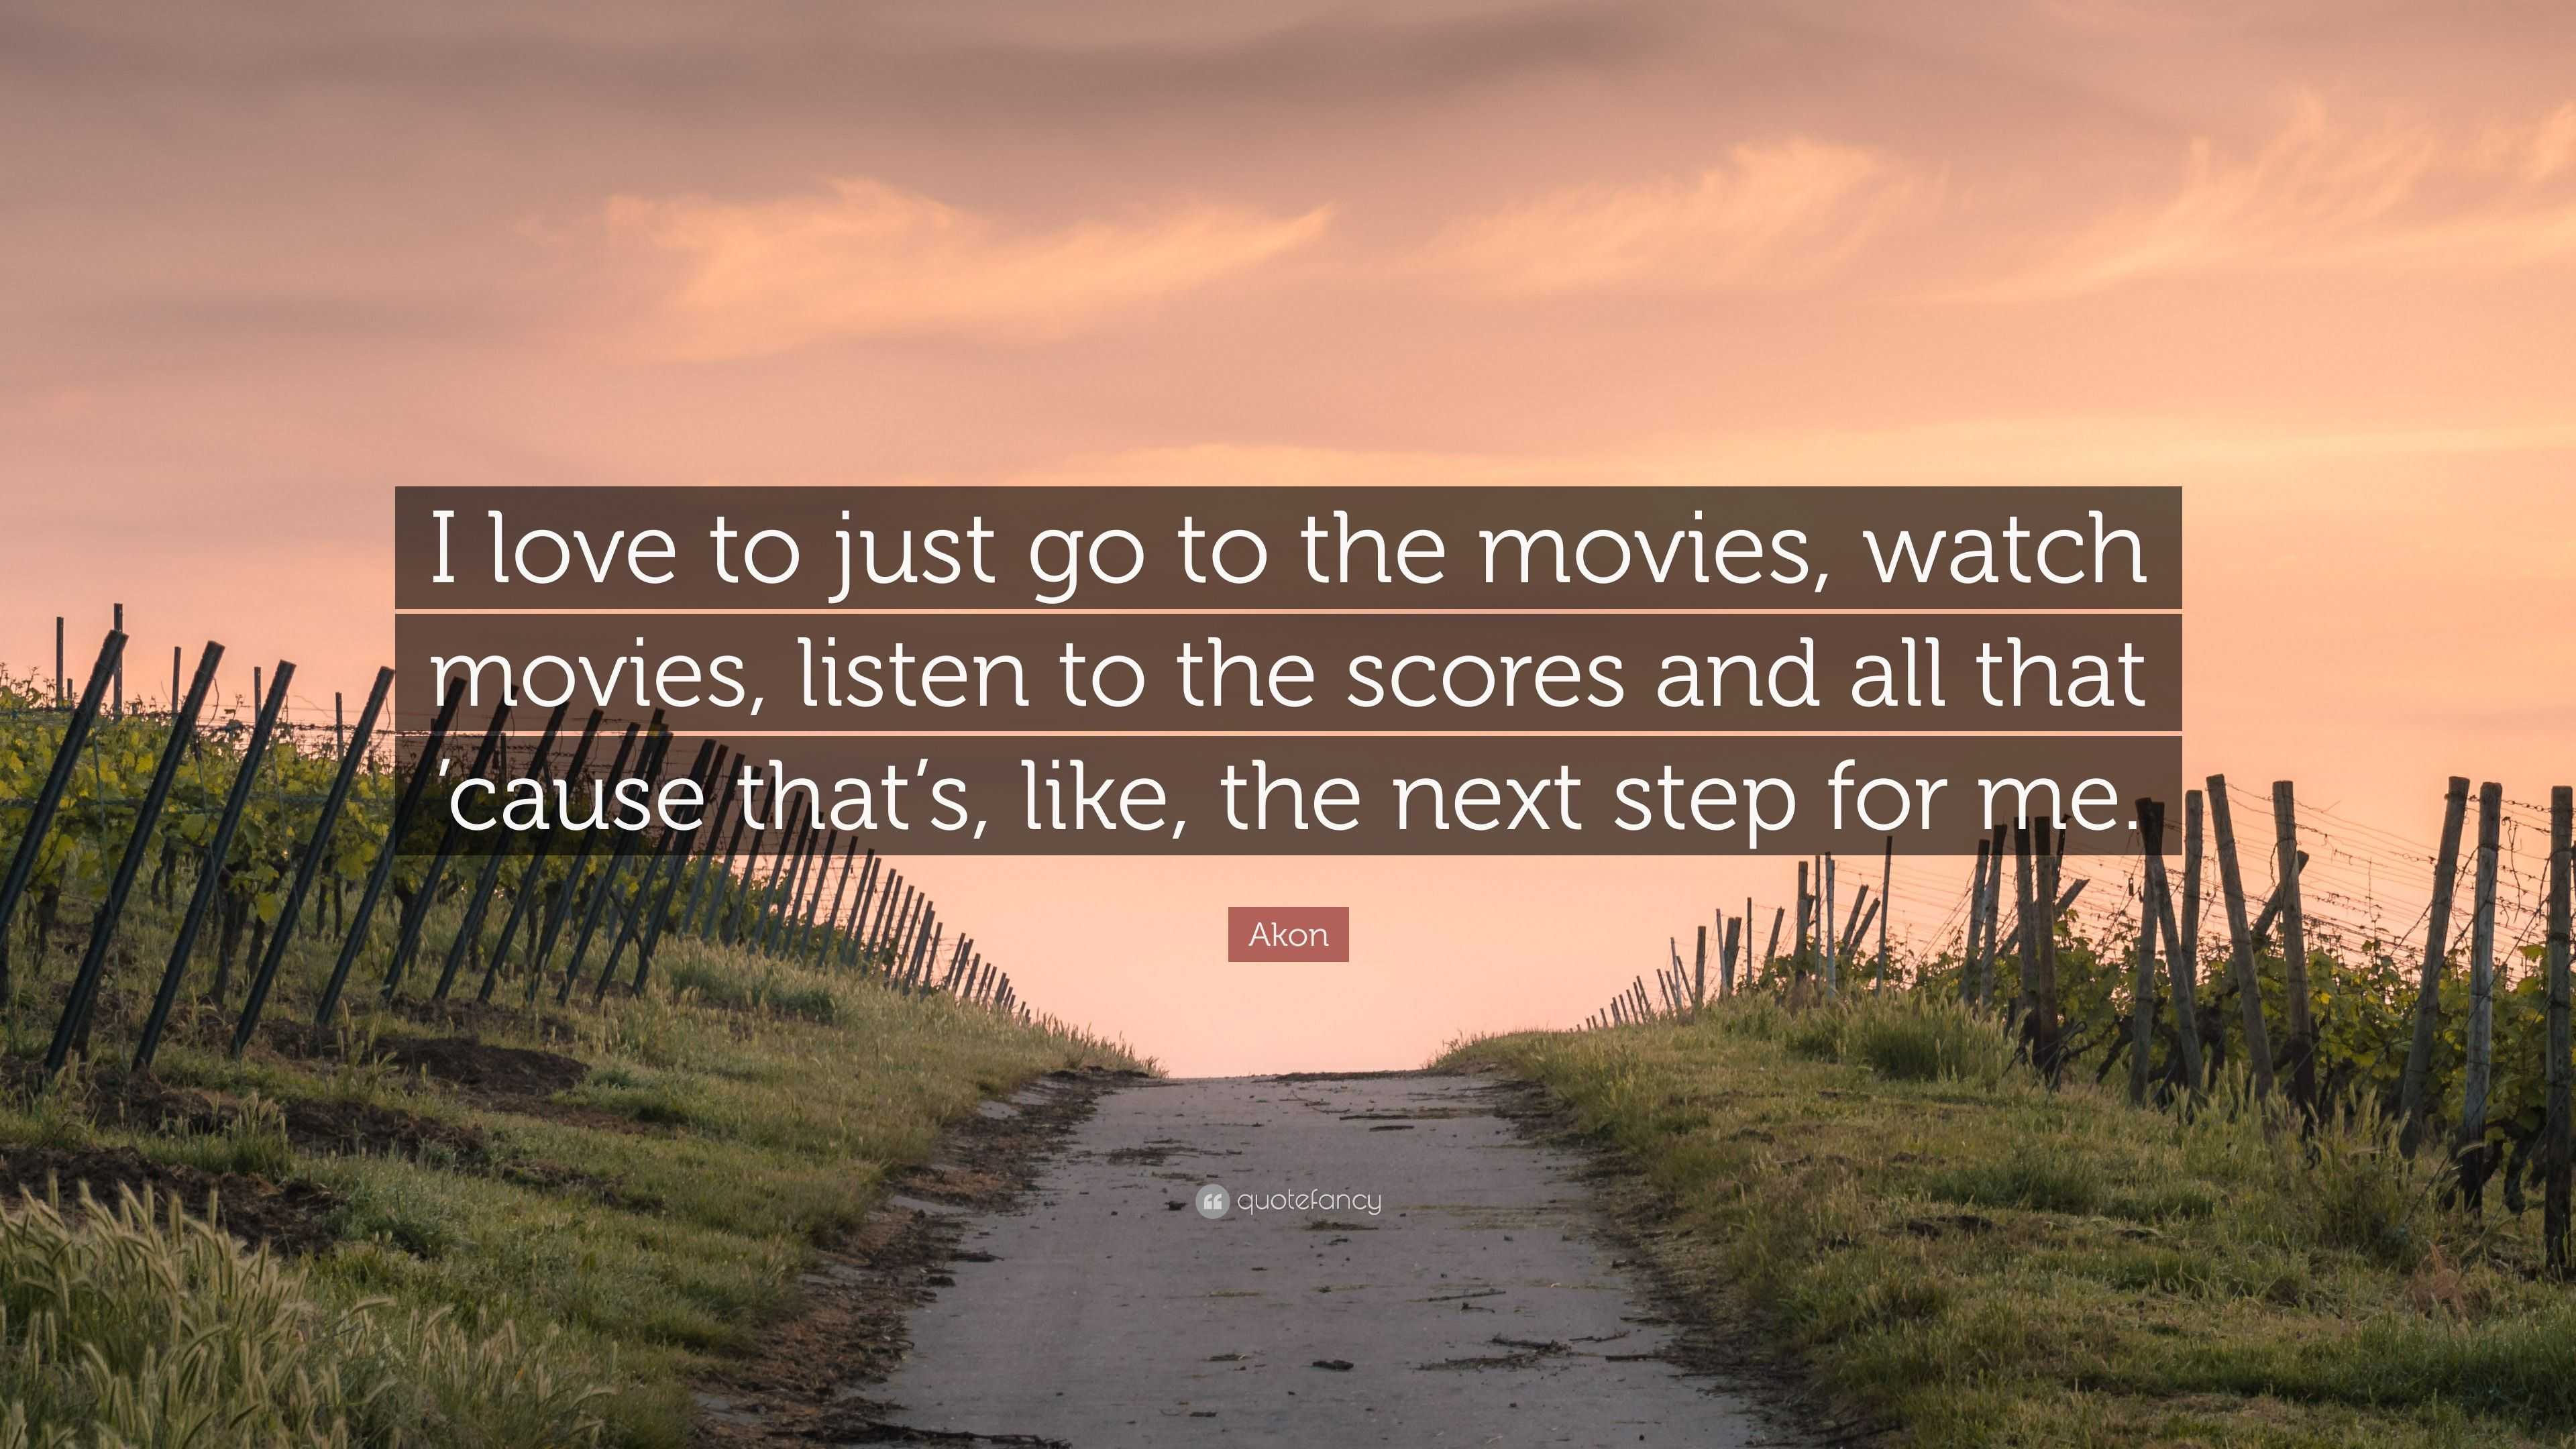 https://quotefancy.com/media/wallpaper/3840x2160/5327175-Akon-Quote-I-love-to-just-go-to-the-movies-watch-movies-listen-to.jpg